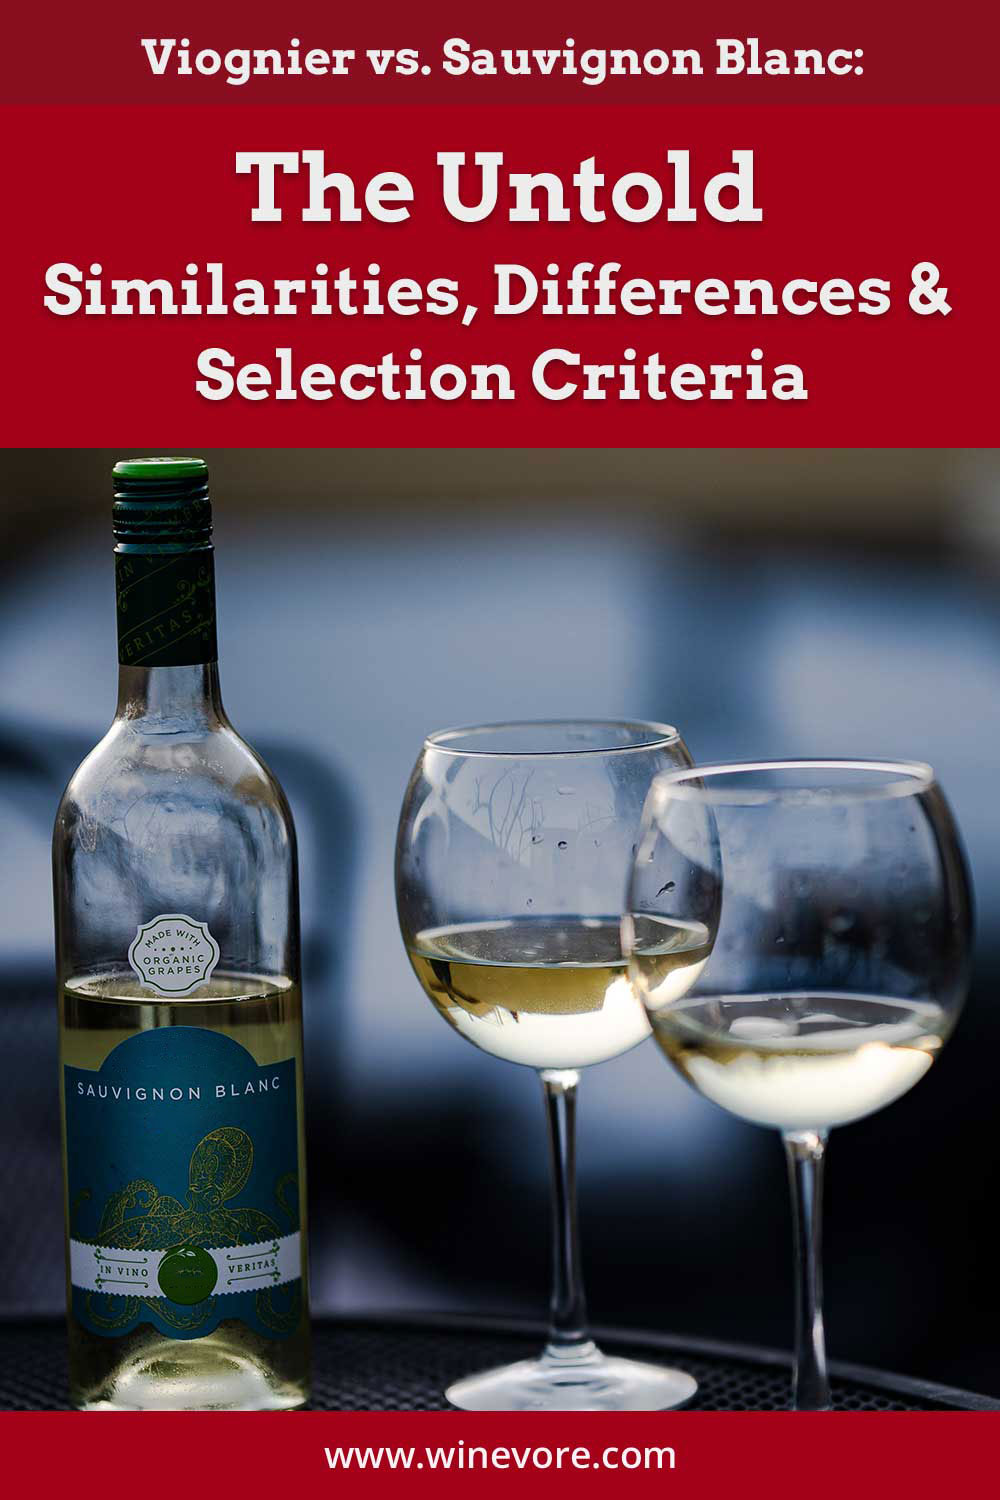 Two wine glasses and a bottle - Viognier vs. Sauvignon Blanc: Similarities, Differences & Selection Criteria